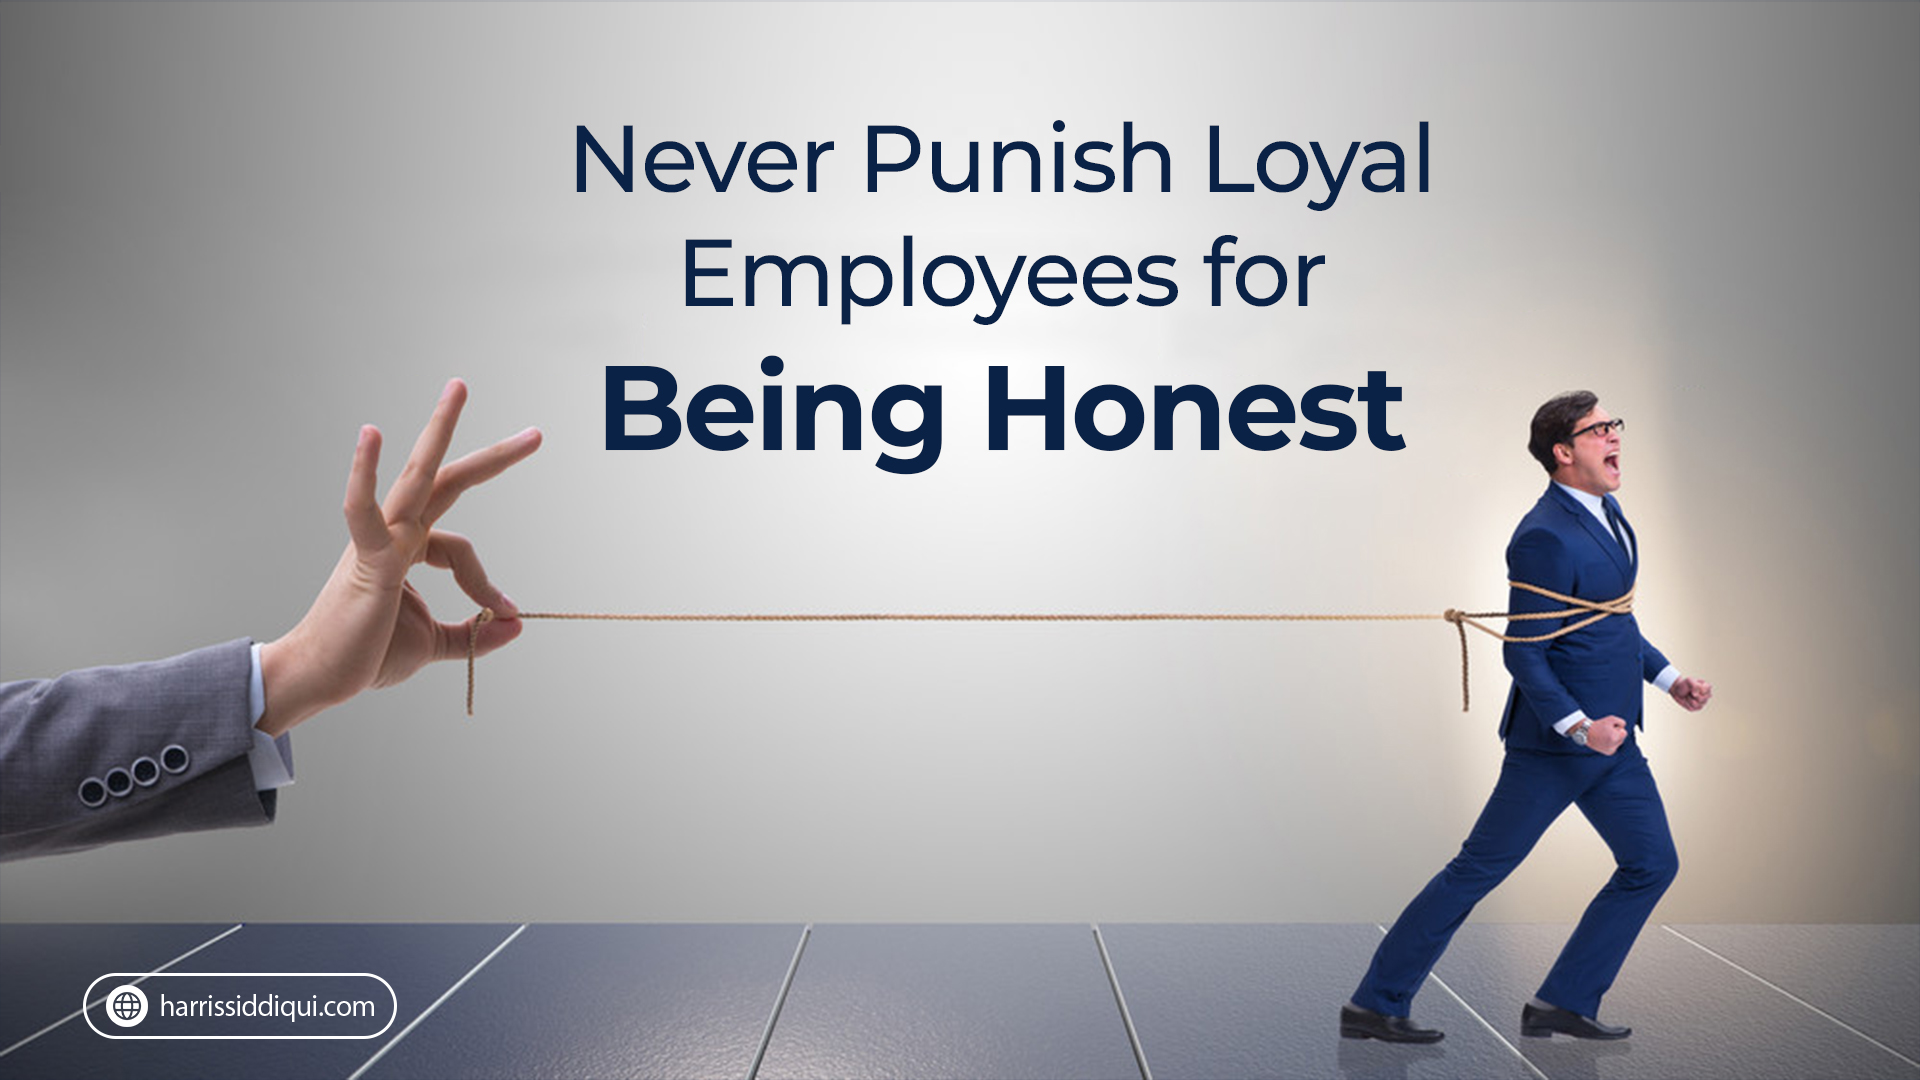 Never Punish Loyal Employees for Being Honest